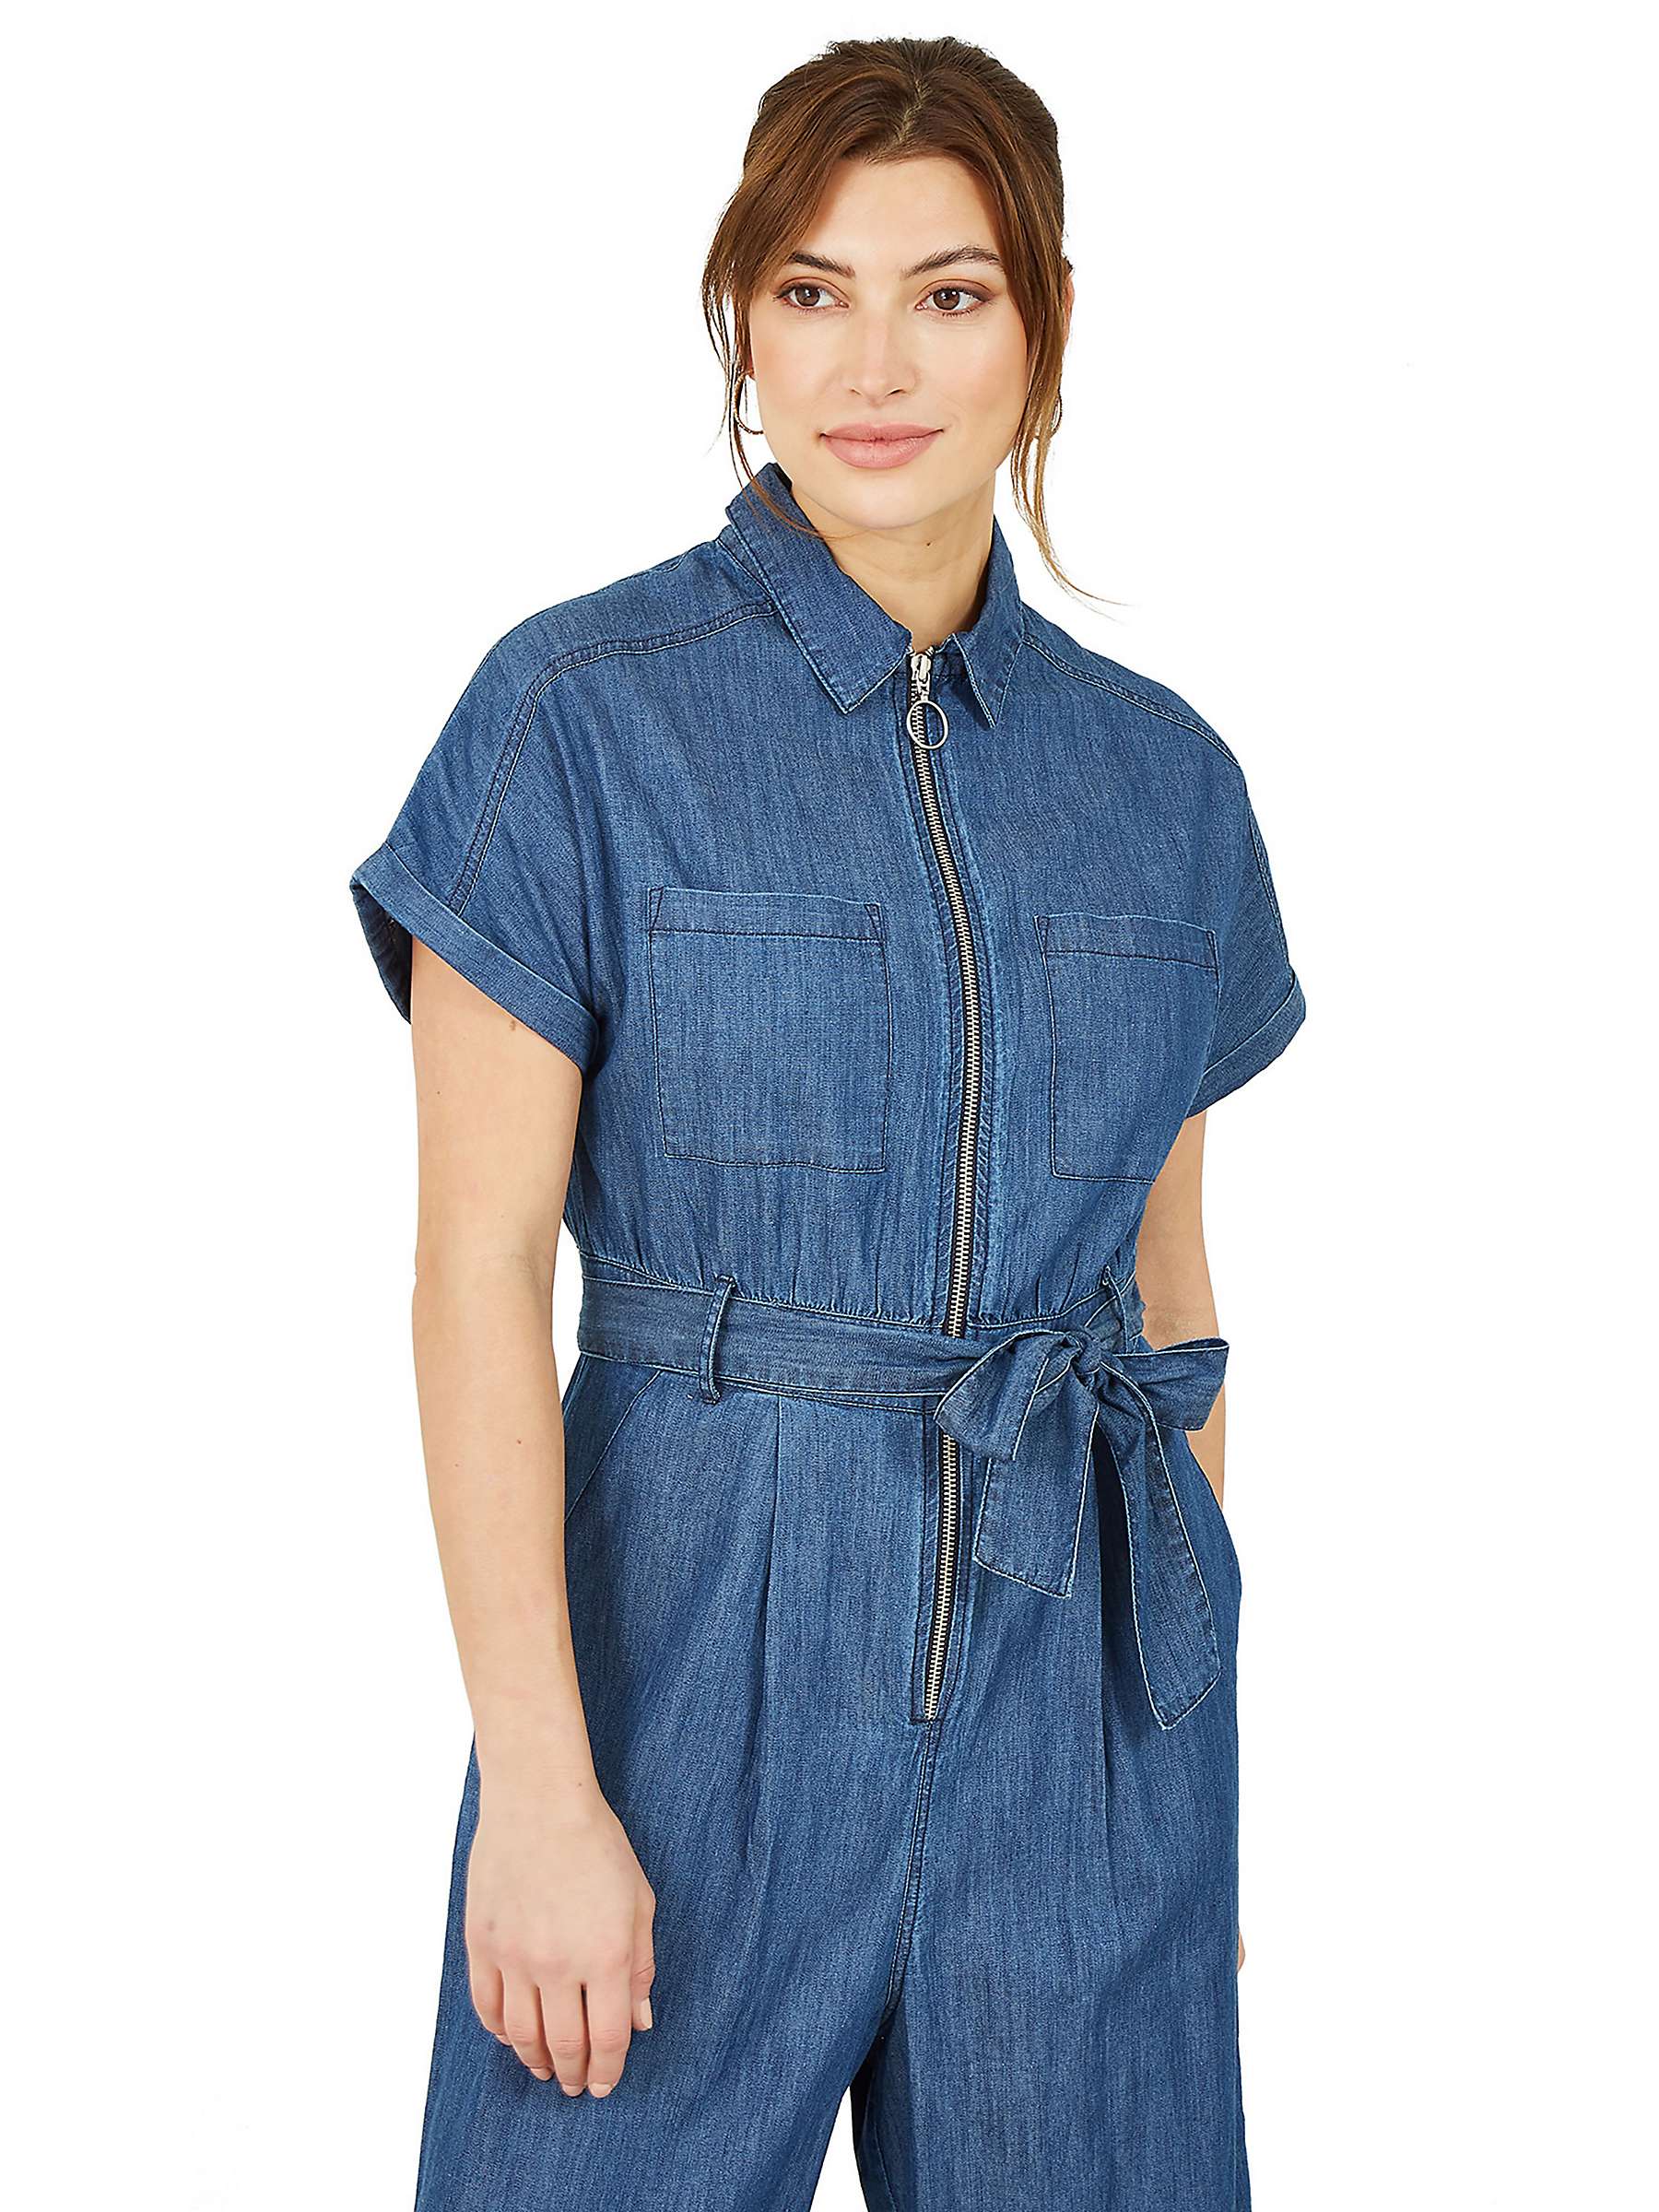 Buy Yumi Chambray Utility Boiler Suit, Blue Online at johnlewis.com